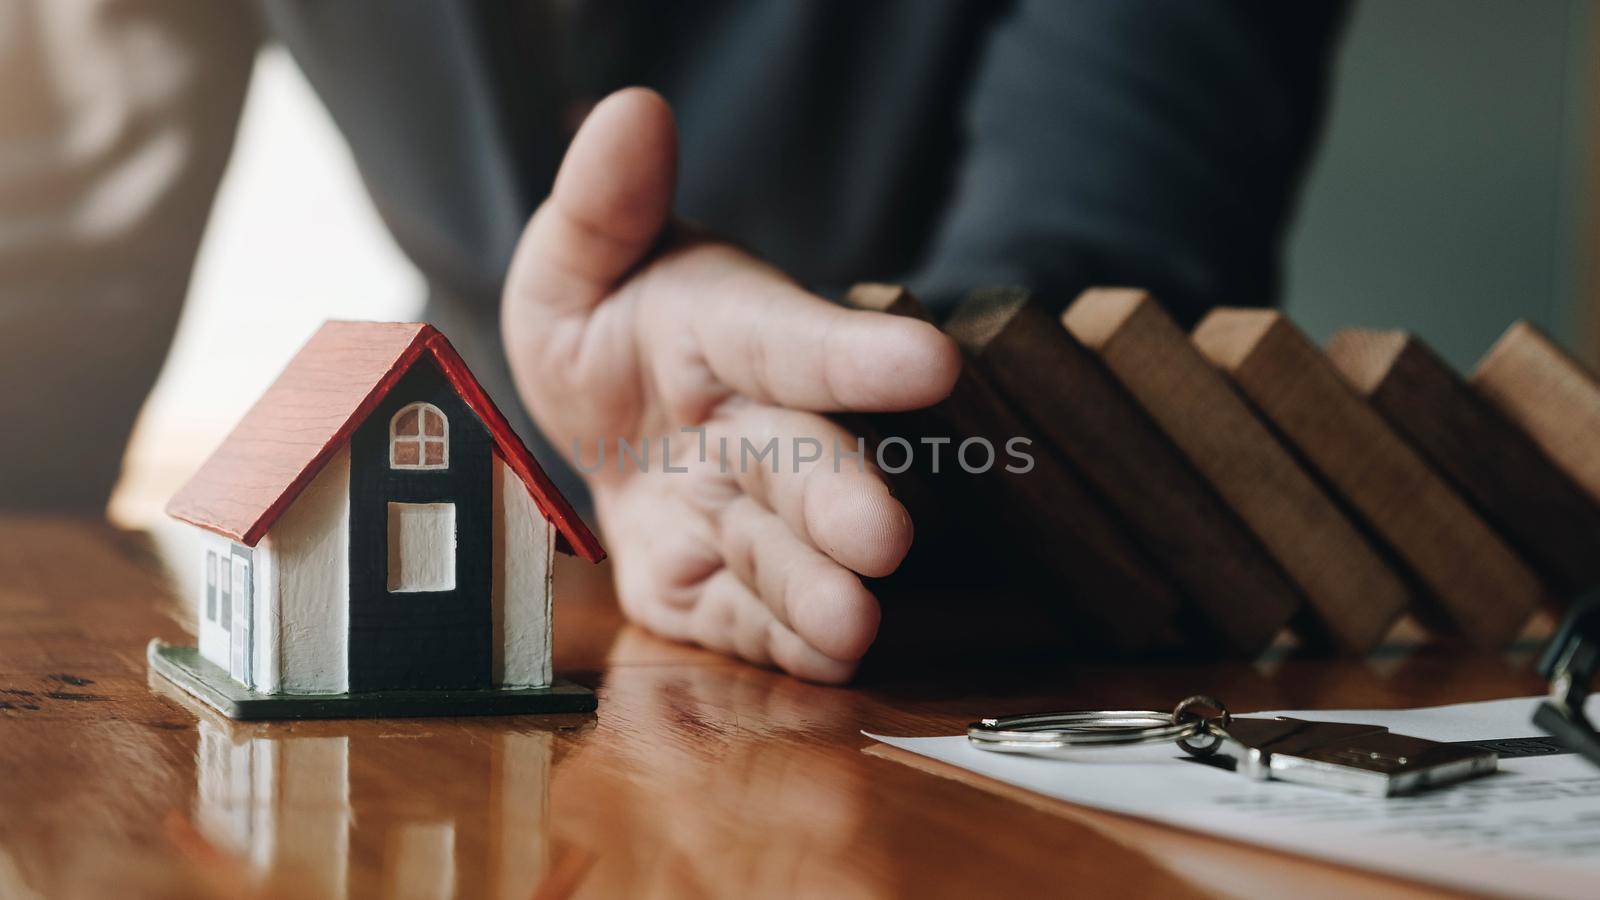 Protect the house from falling over the wooden blocks, Insurance and risk concept.
